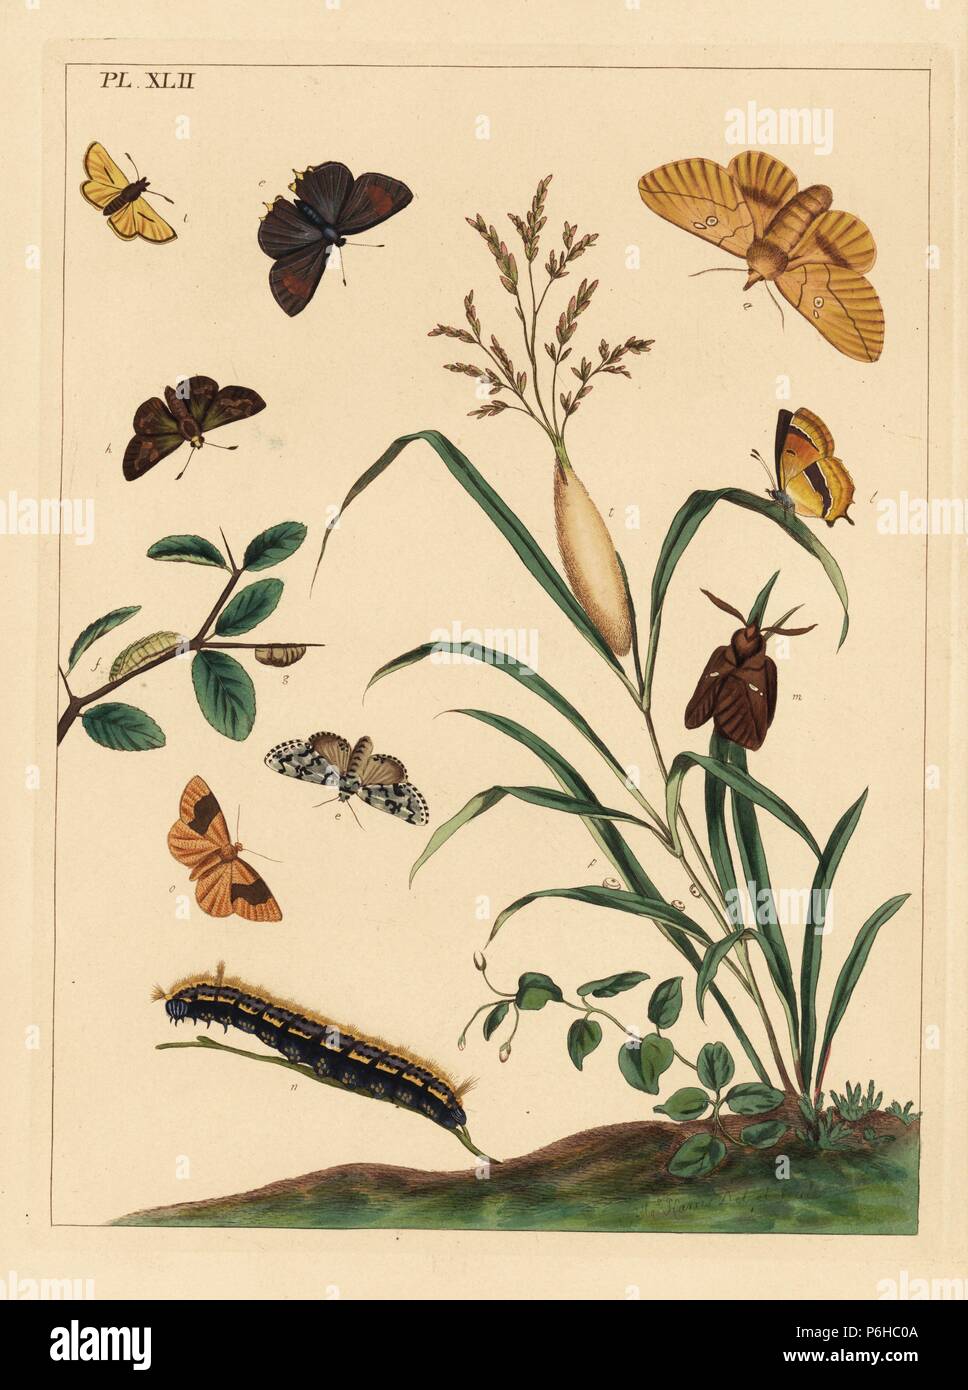 Drinker moth, Euthrix potatoria, brown hair streak, Thecla betulae, large skipper, Ochlodes sylvanus, small skipper, Thymelicus sylvestris, scarce marvel du jour, Dipthera runica, and barred umber, Plagodis pulveraria. Handcoloured lithograph after an illustration by Moses Harris from 'The Aurelian; a Natural History of English Moths and Butterflies,' new edition edited by J. O. Westwood, published by Henry Bohn, London, 1840. Stock Photo